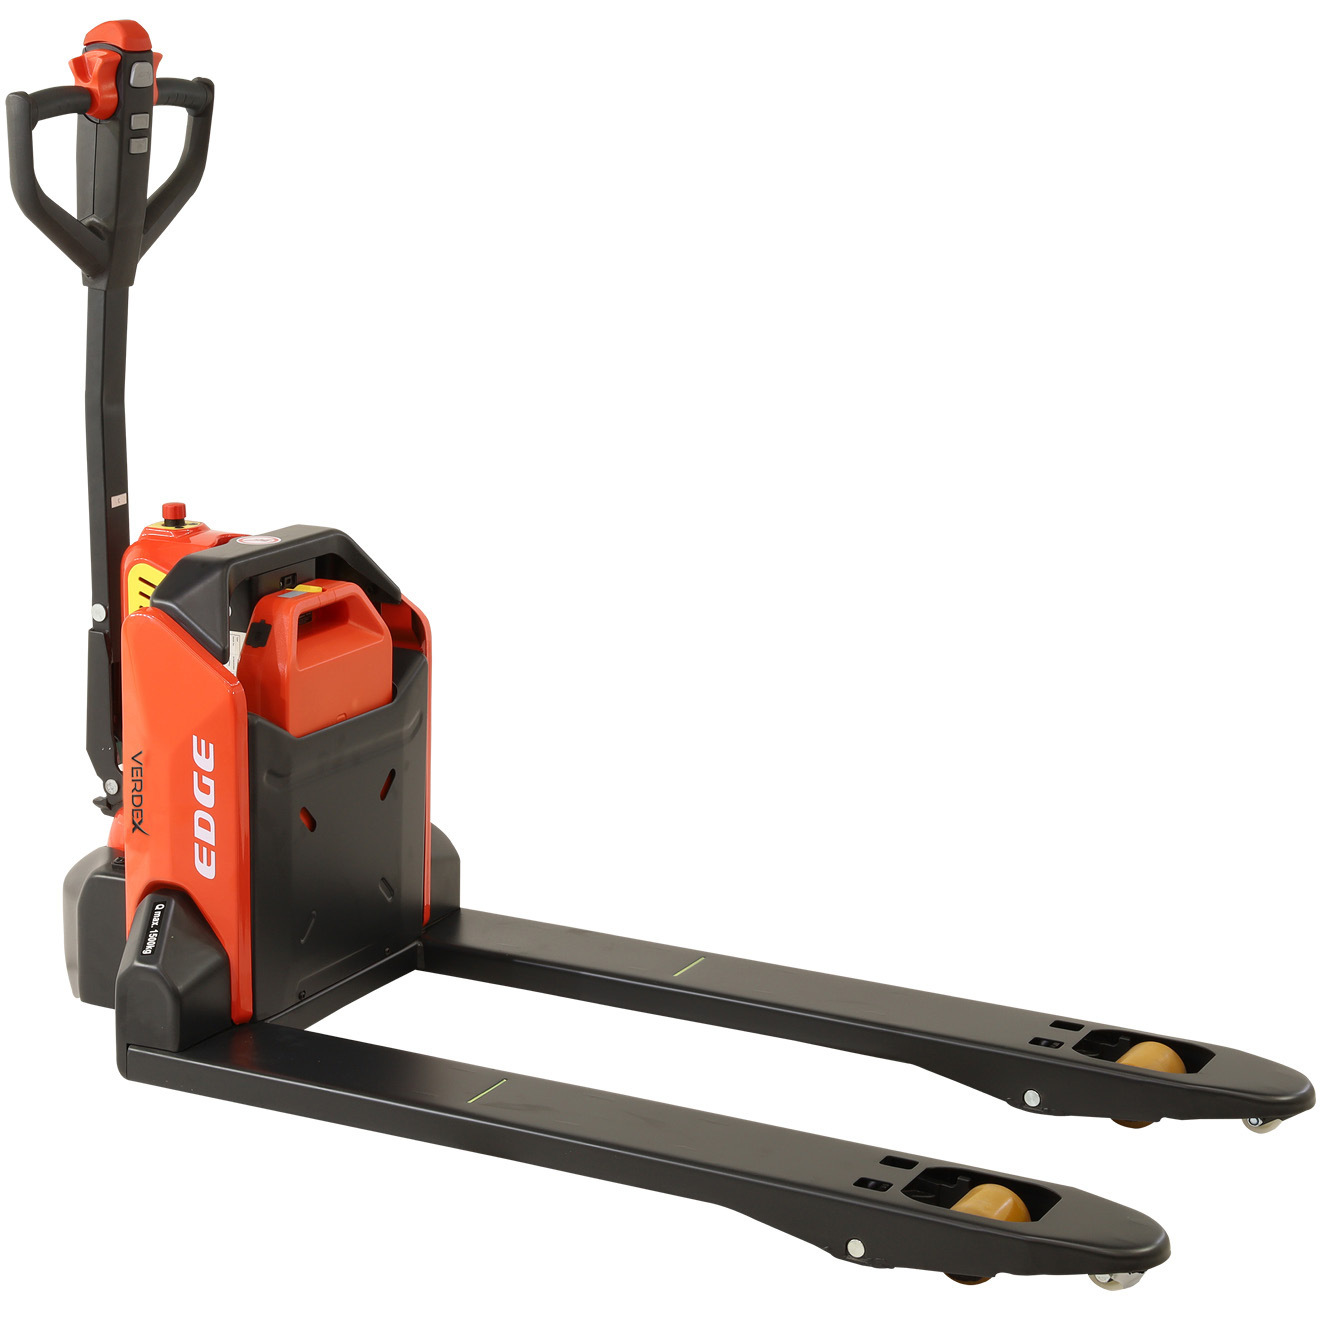 The Edge - Electric Pallet Truck 1500kg (supplied with 1 battery) - 540mm wide